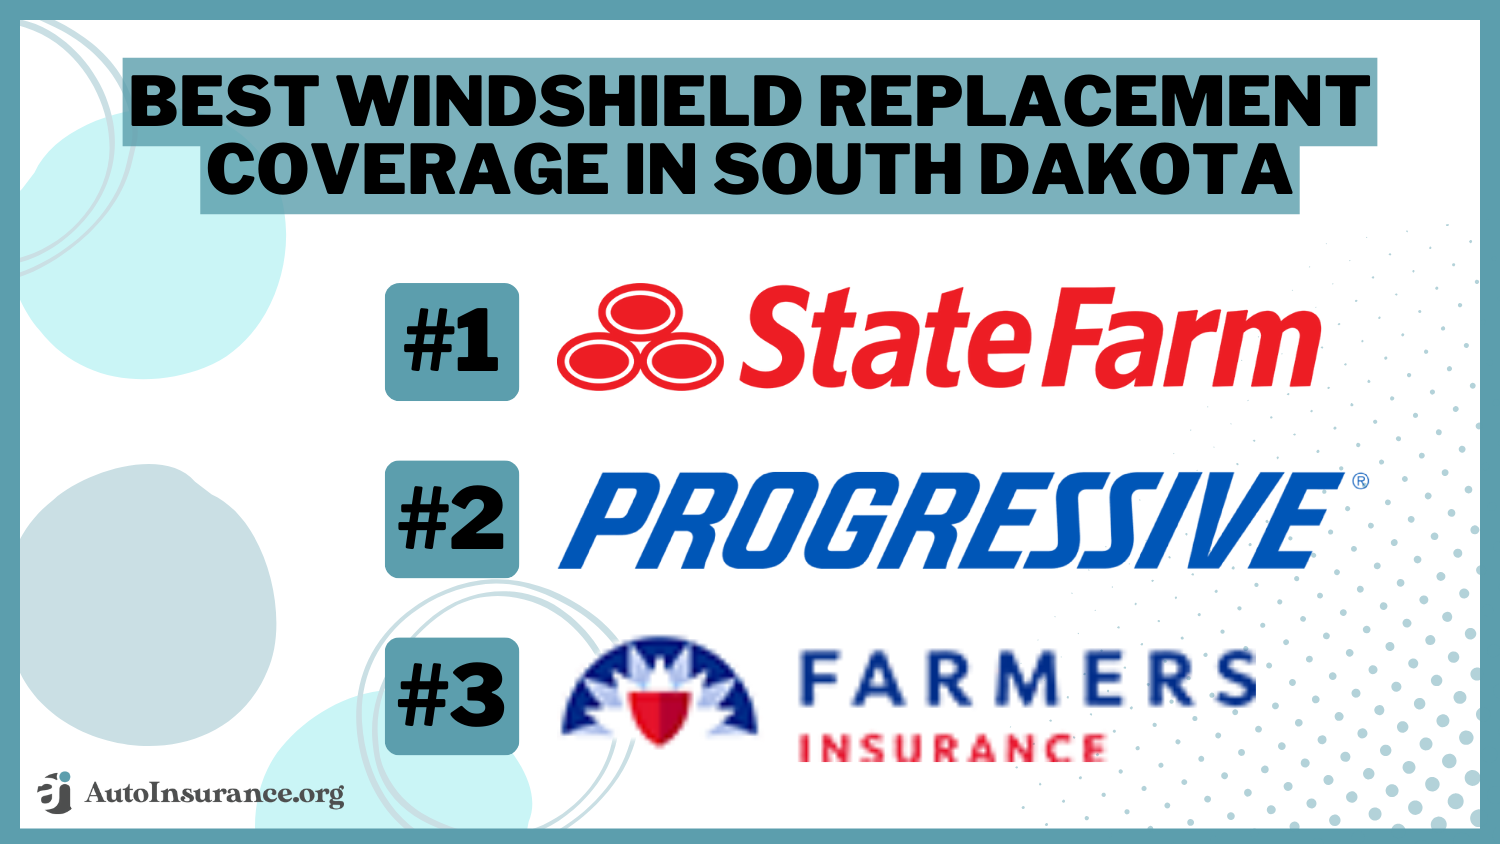 Best Windshield Replacement Coverage in South Dakota: State Farm, Progressive, and Farmers